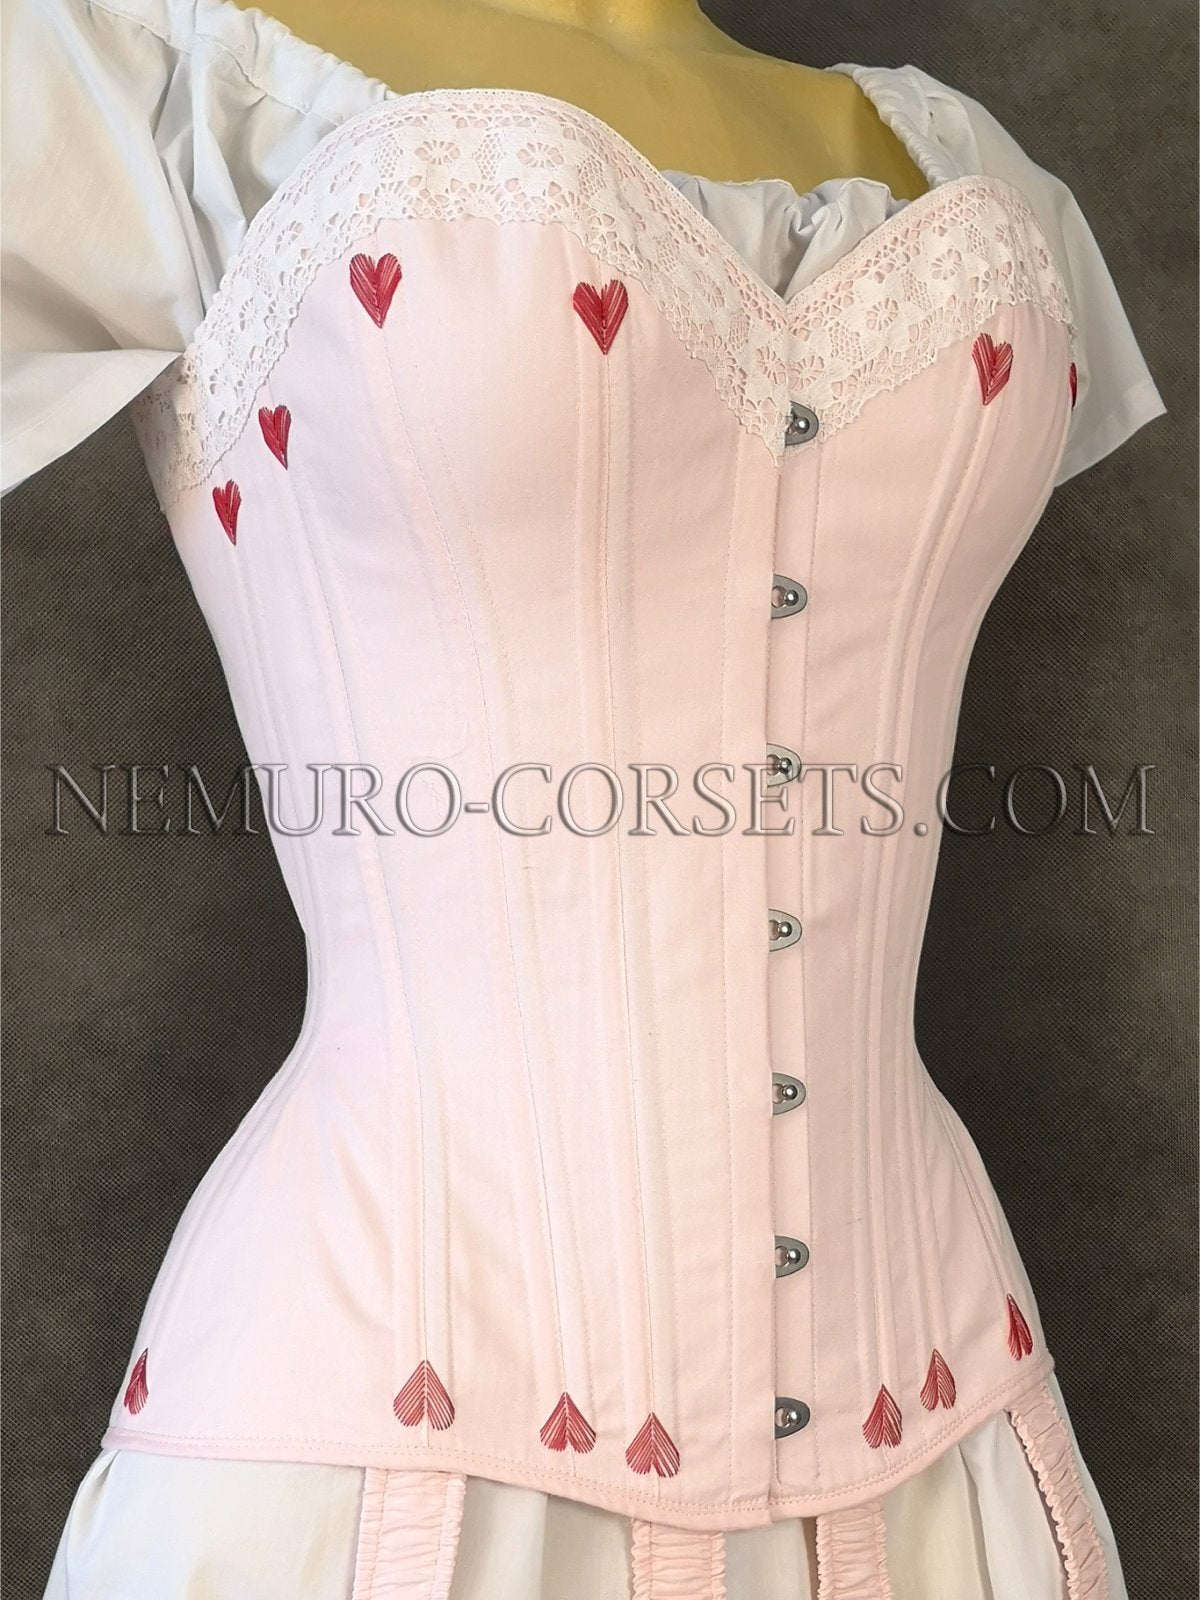 Complete your Bridal Look with our Bespoke White Victorian Corset